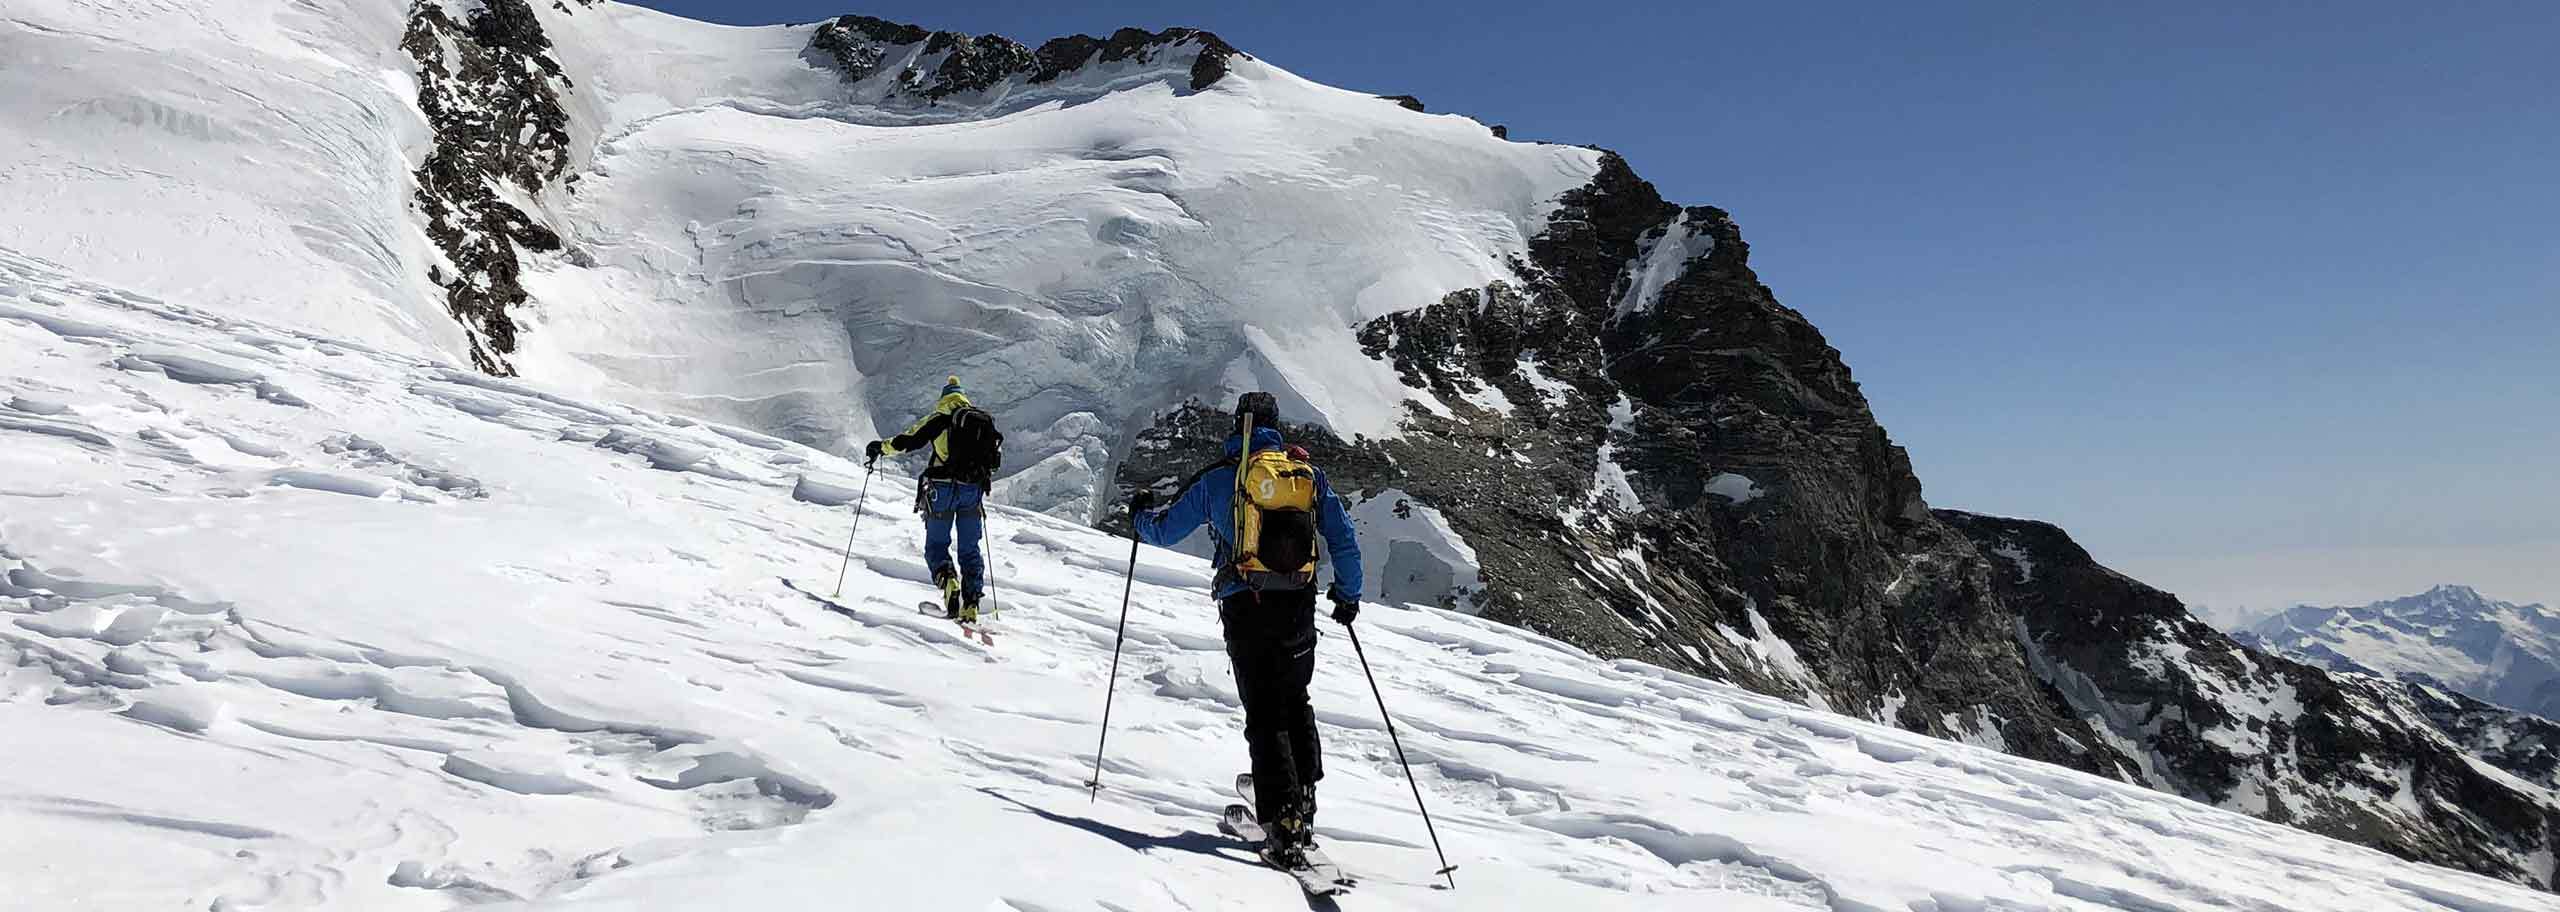 Ski Mountaineering with Mountain Guide in Alagna, Monte Rosa